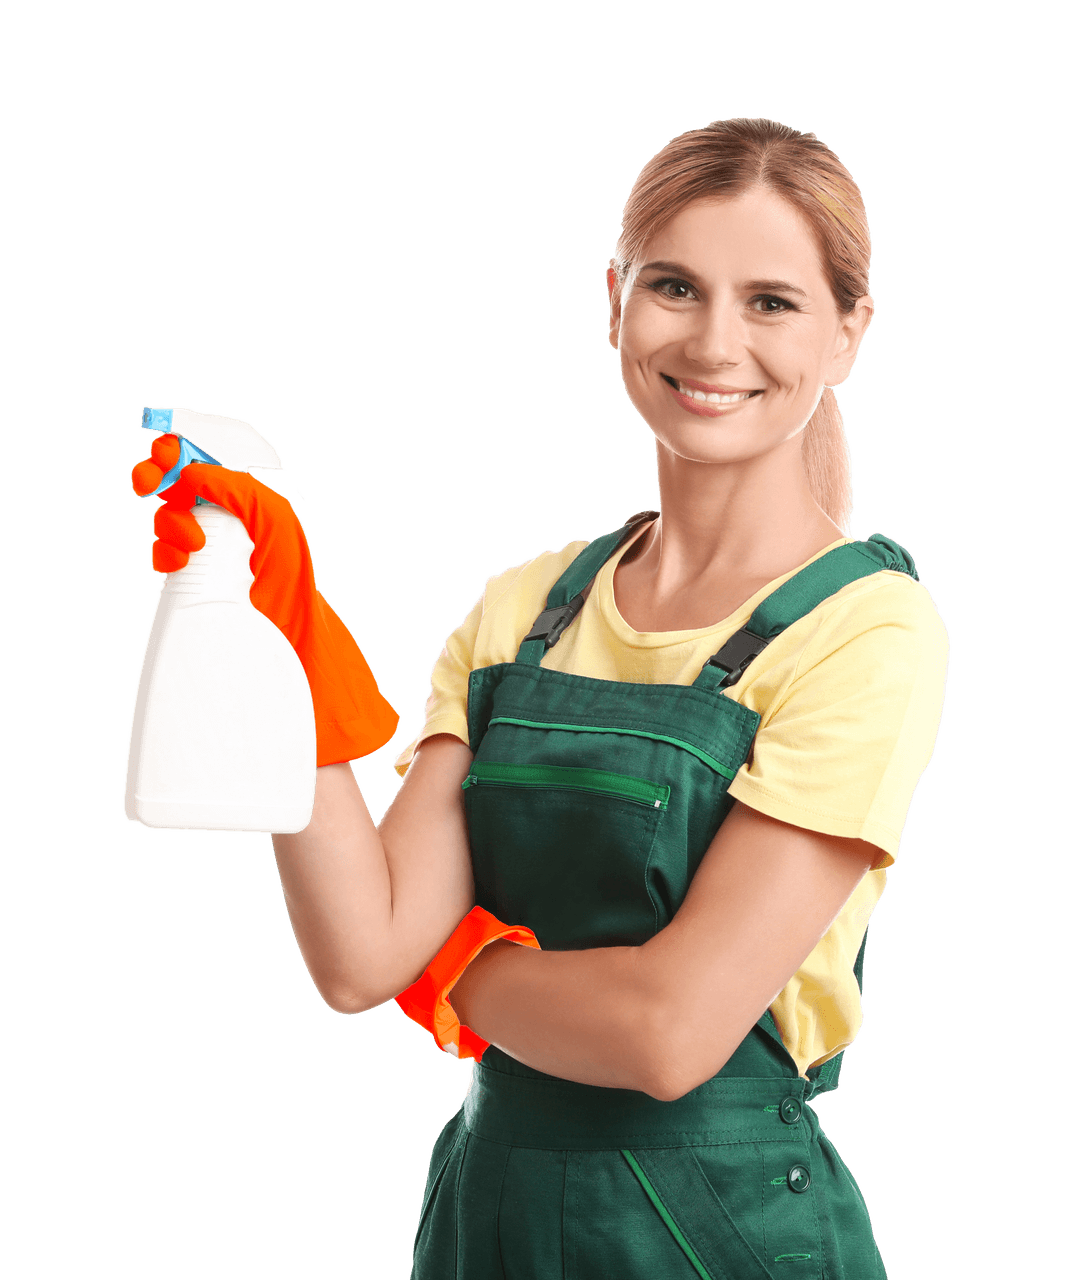 image of Professional Home Cleaners in Kanata wearing cleaning clothes